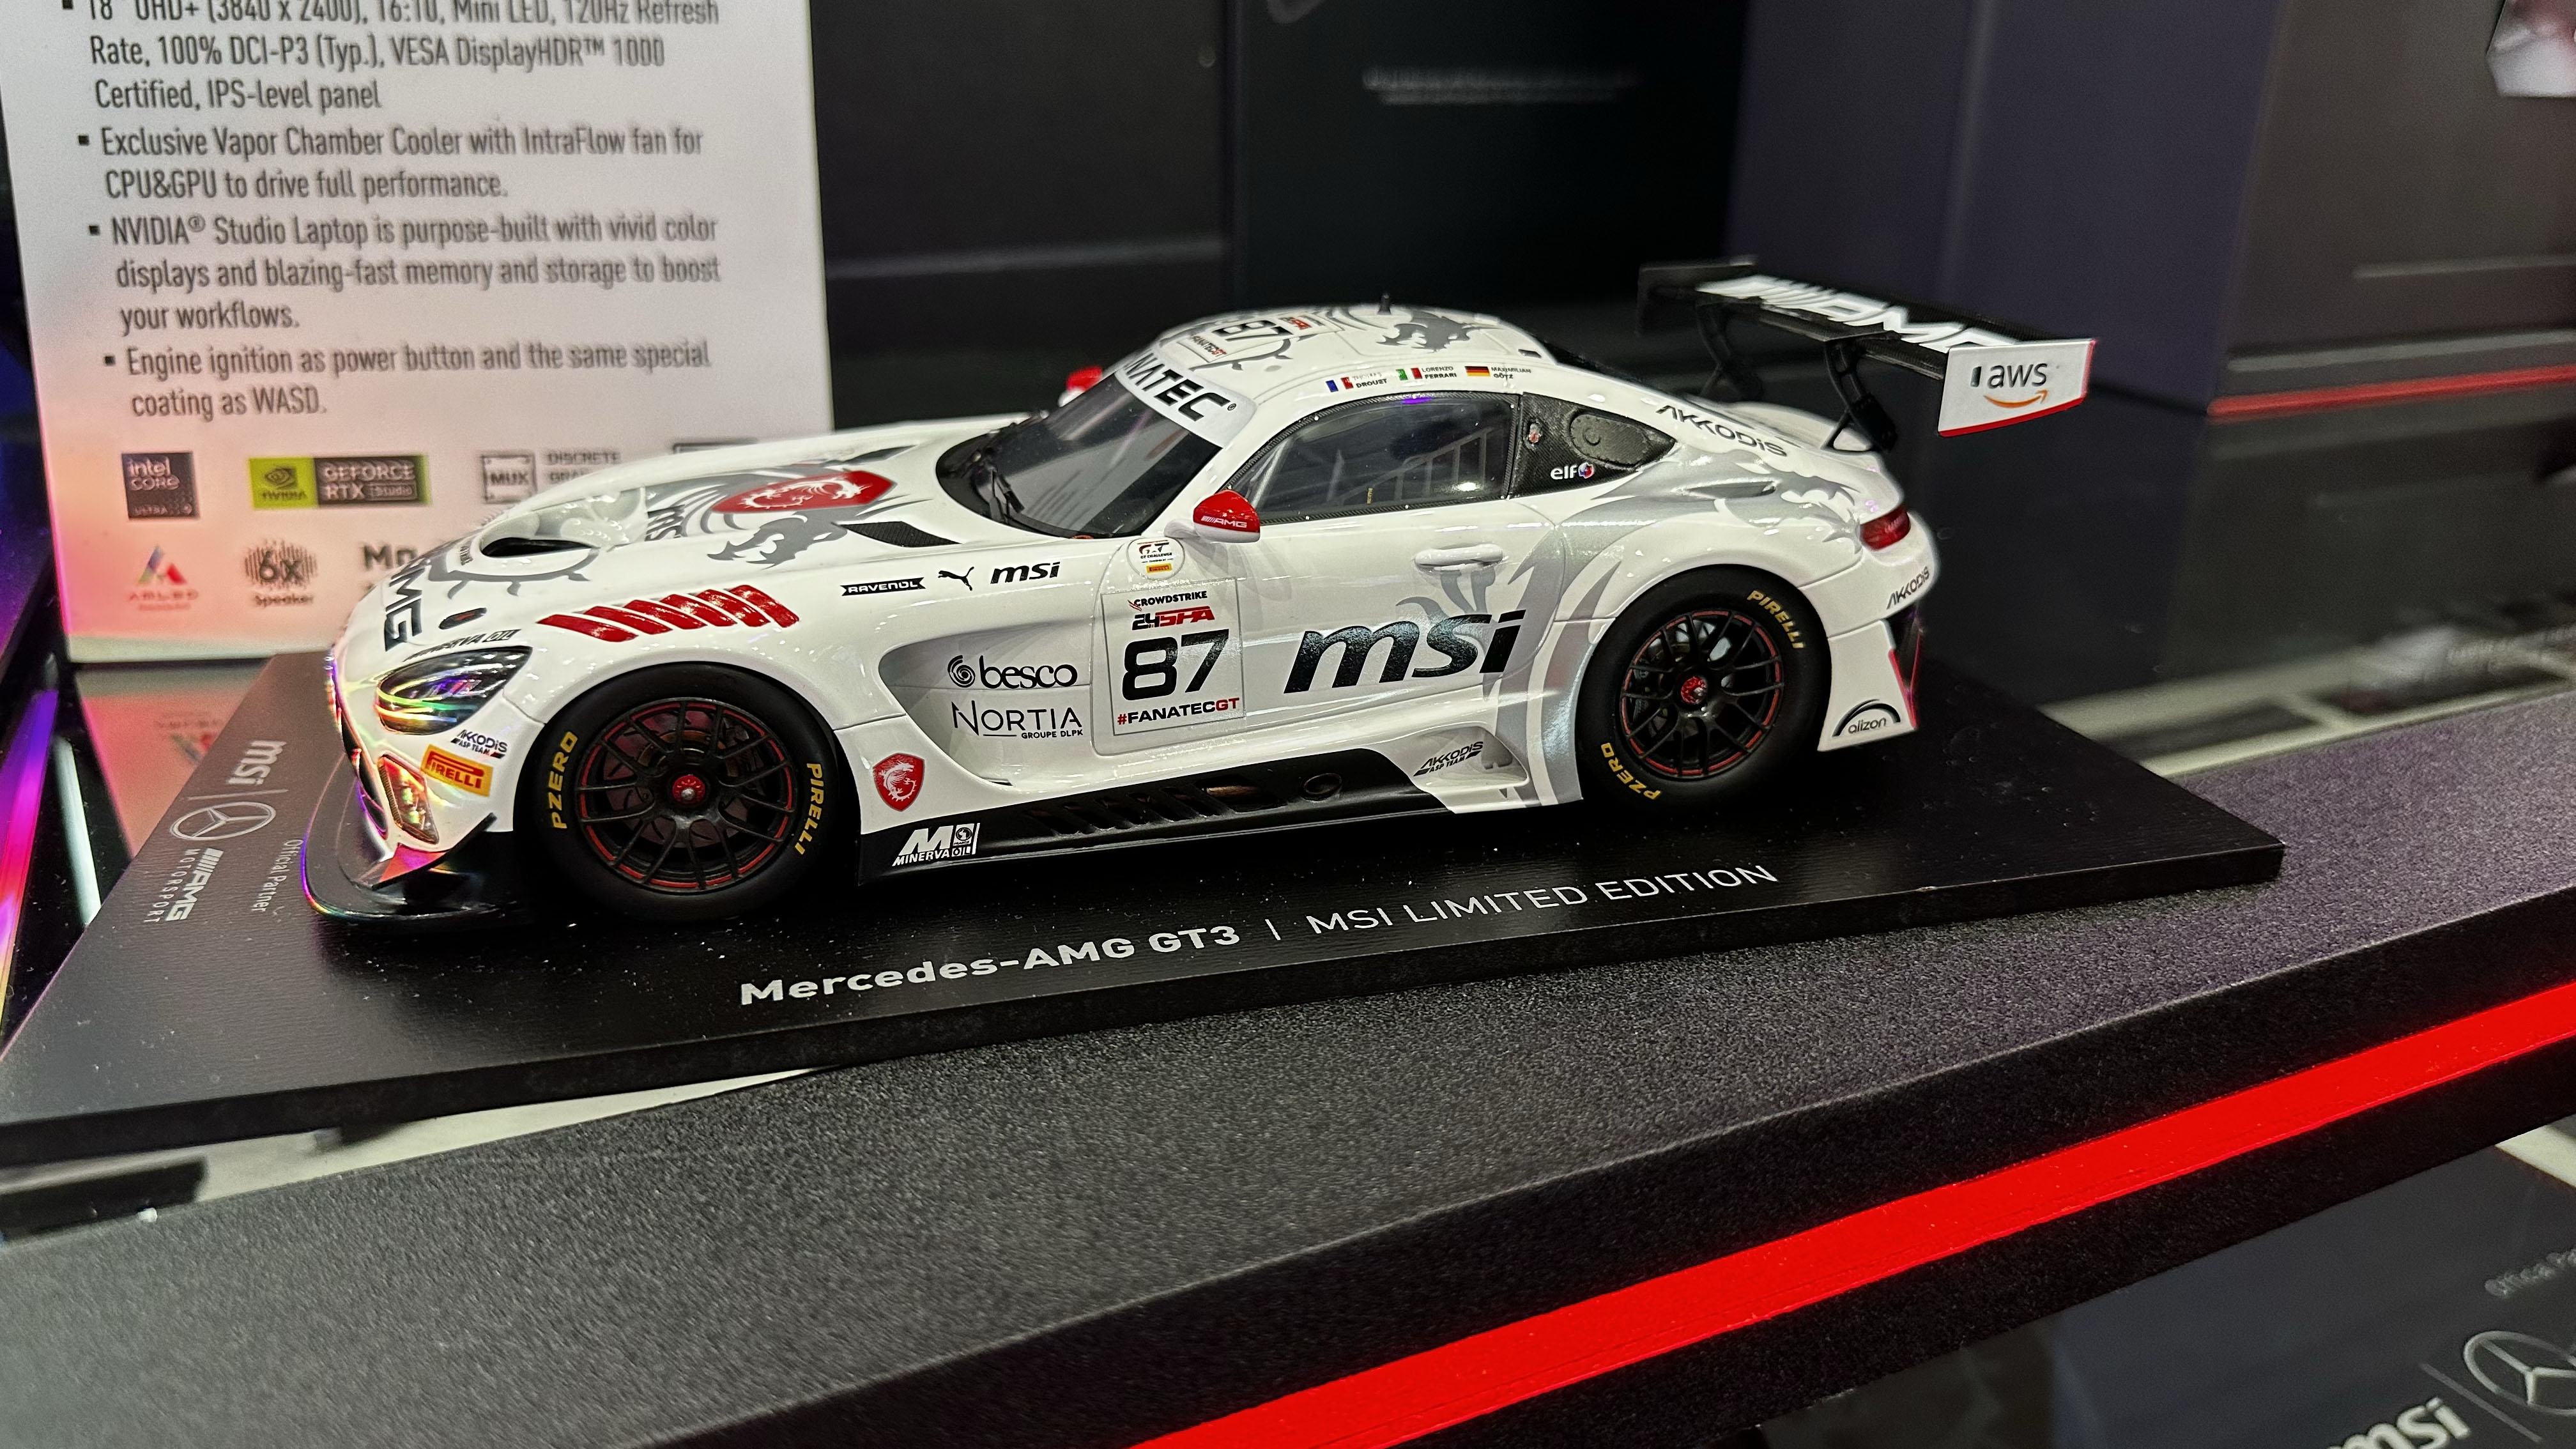 Mercedes AMG GT3 model car accessory, part of the MSI Stealth 18 Mercedes-AMG Motorsport accessories line at Computex